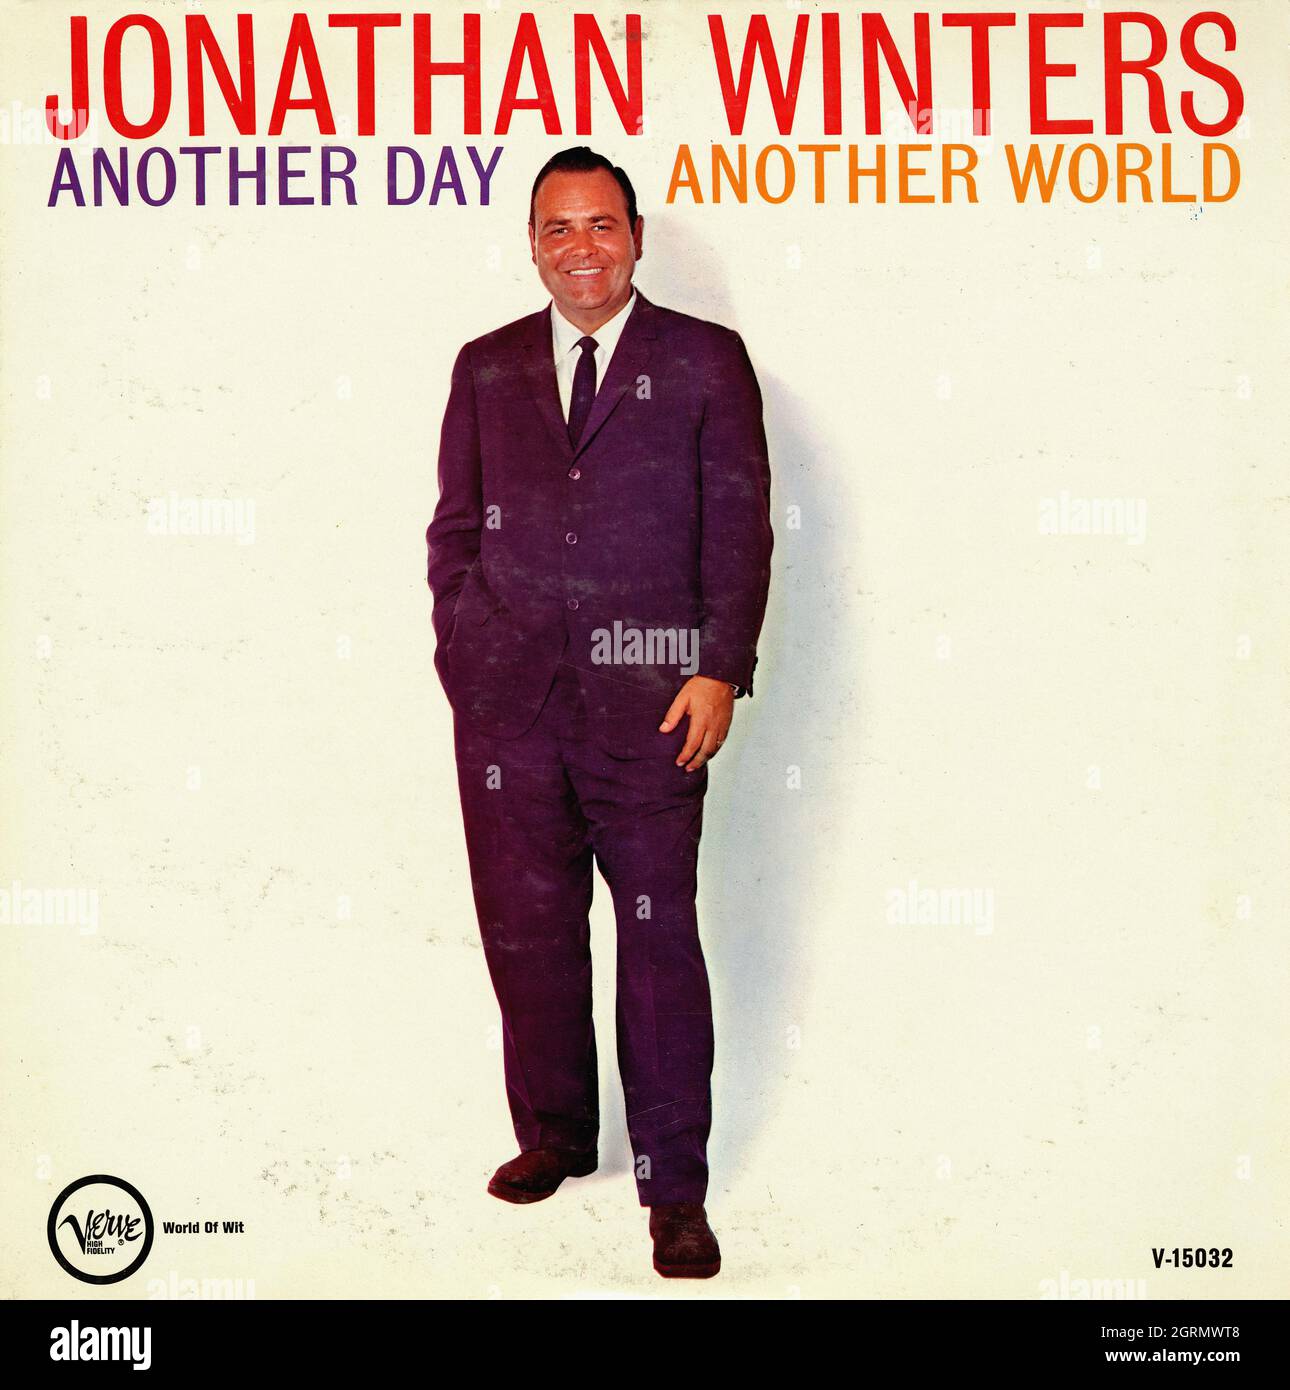 Jonathan Winters Another Day Another World - Vintage American Comedy Vinyl Album Stockfoto